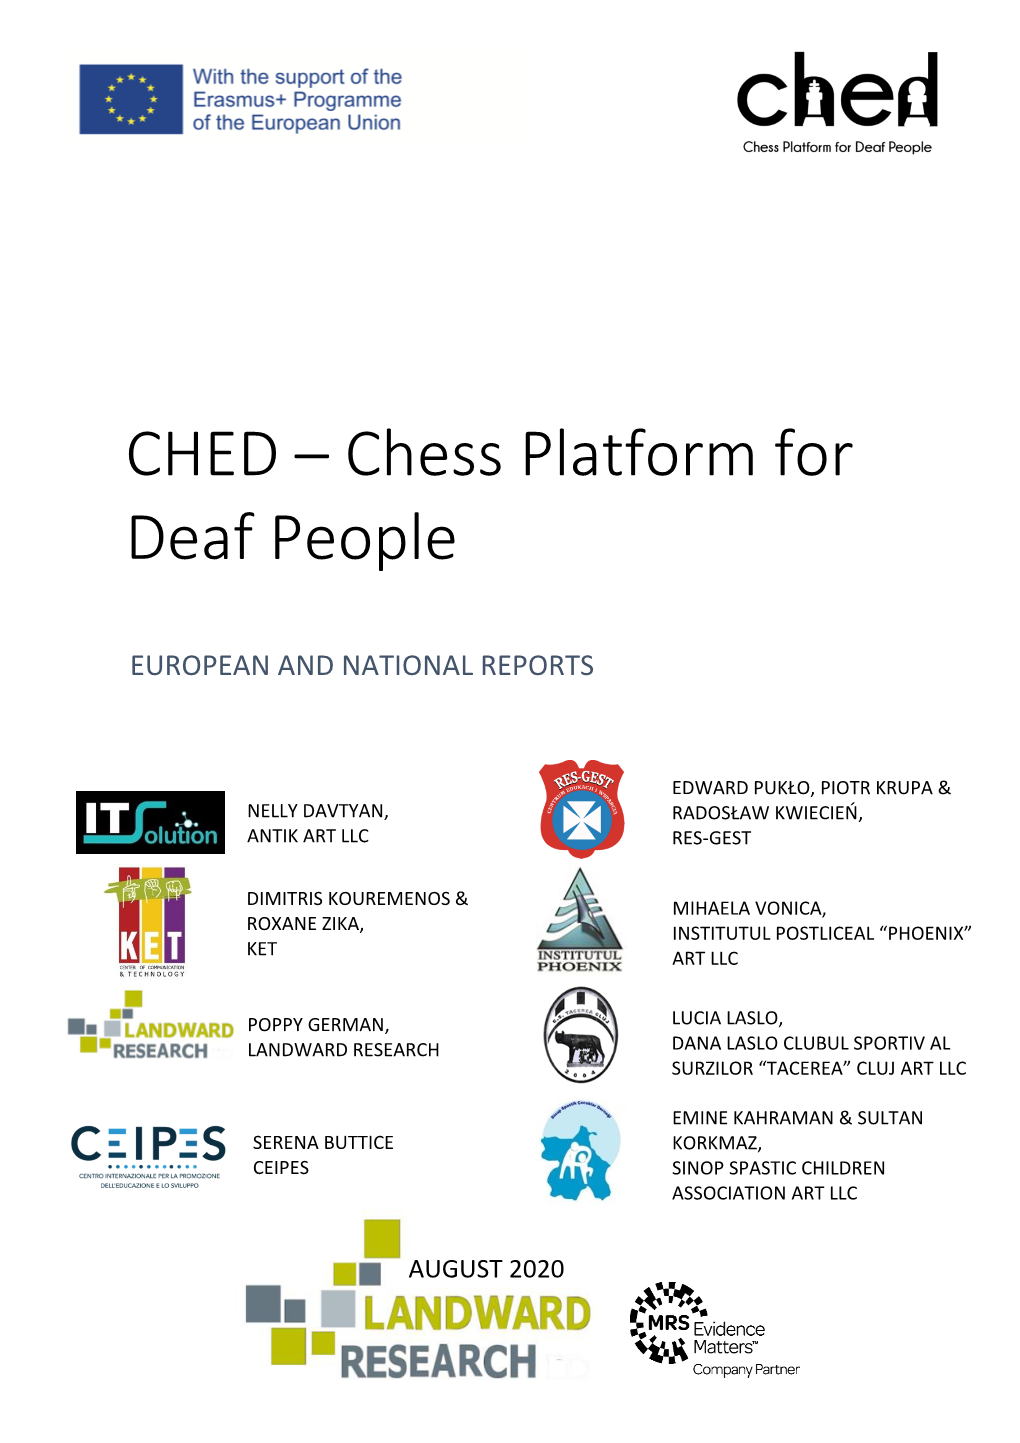 CHED – Chess Platform for Deaf People